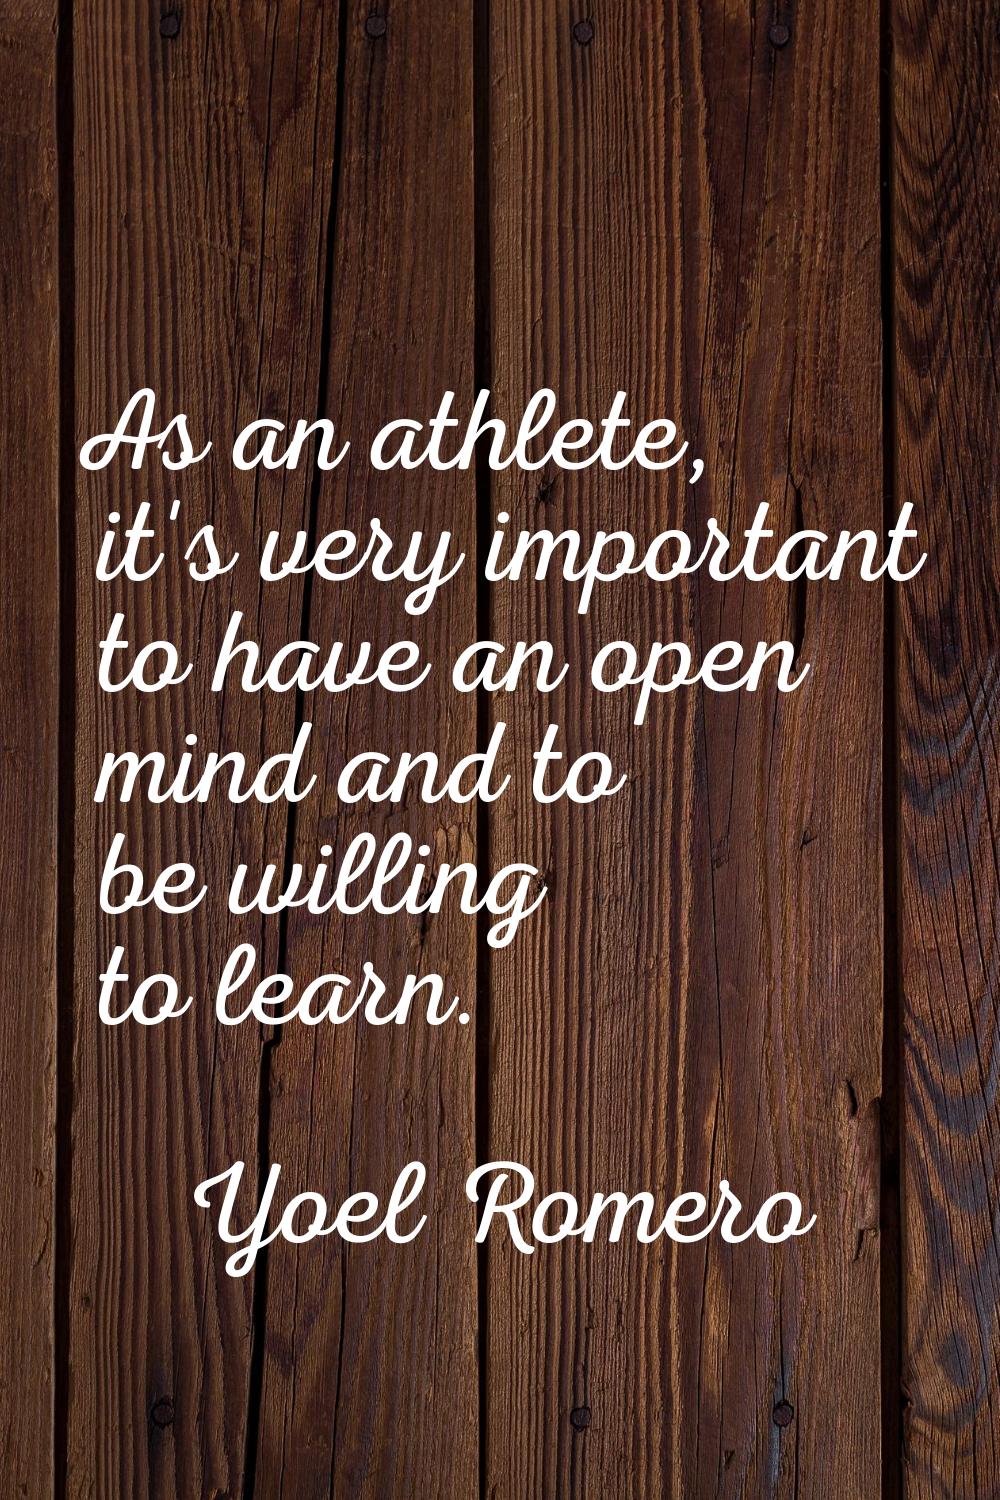 As an athlete, it's very important to have an open mind and to be willing to learn.